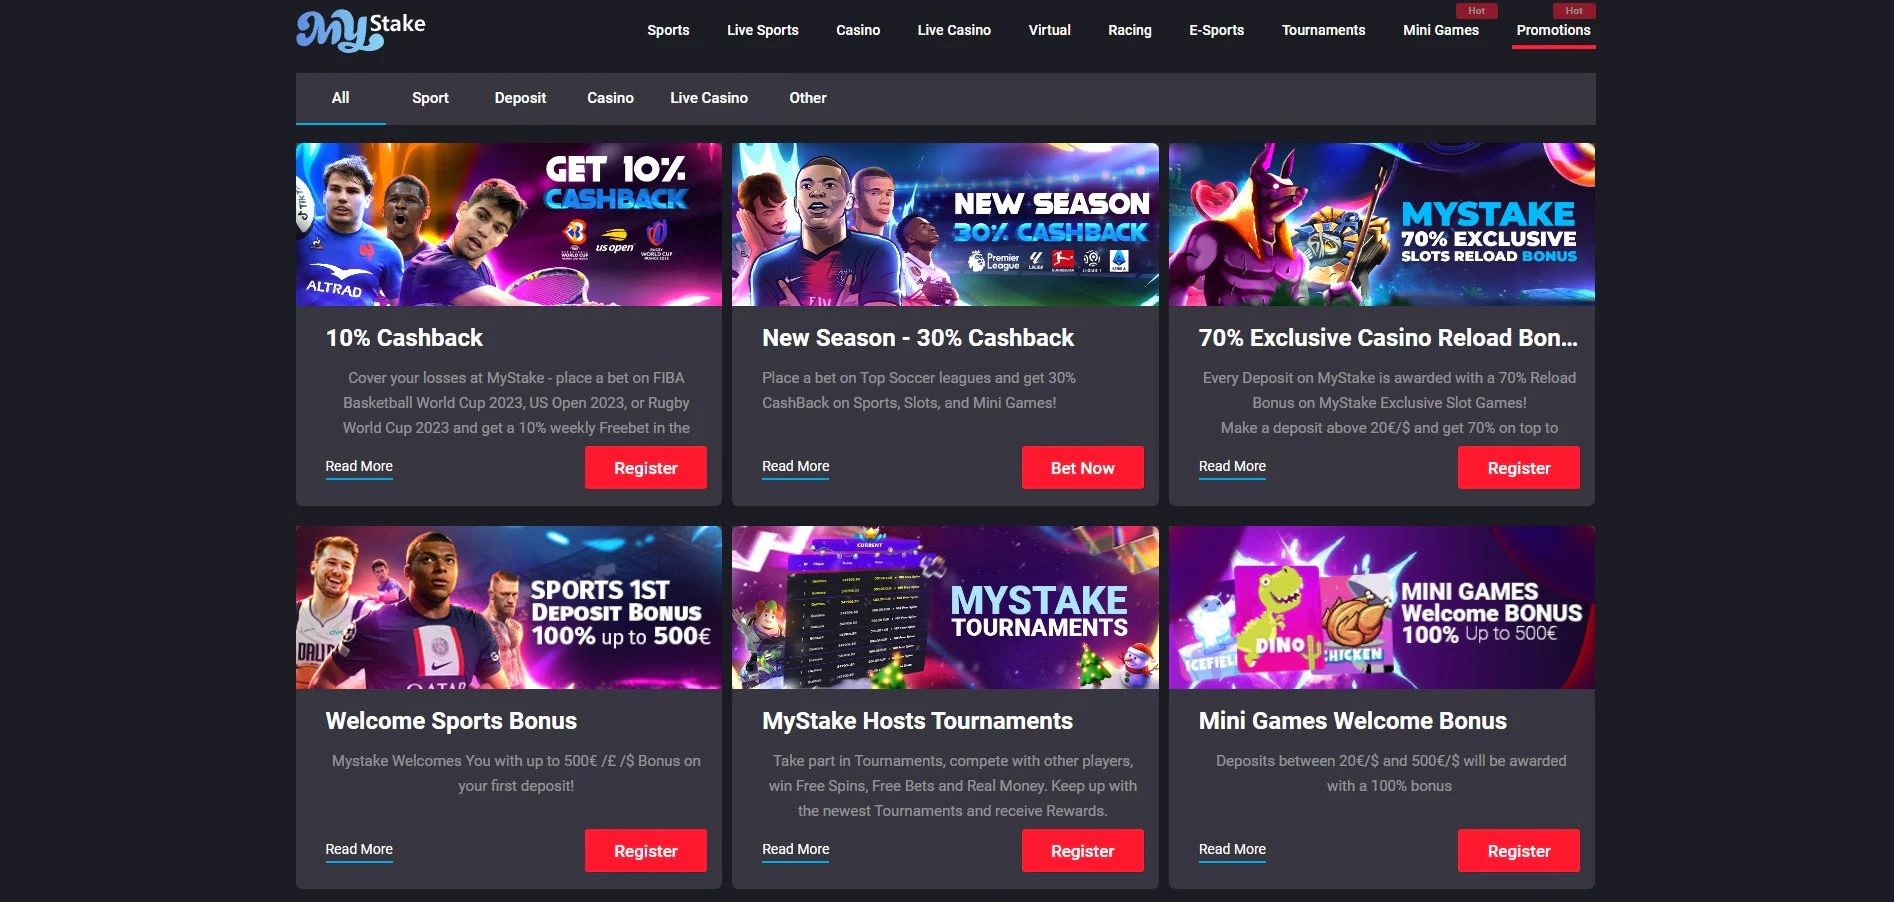 To supplement player’s gambling experience, MyStake offers a huge selection of lucrative promotions